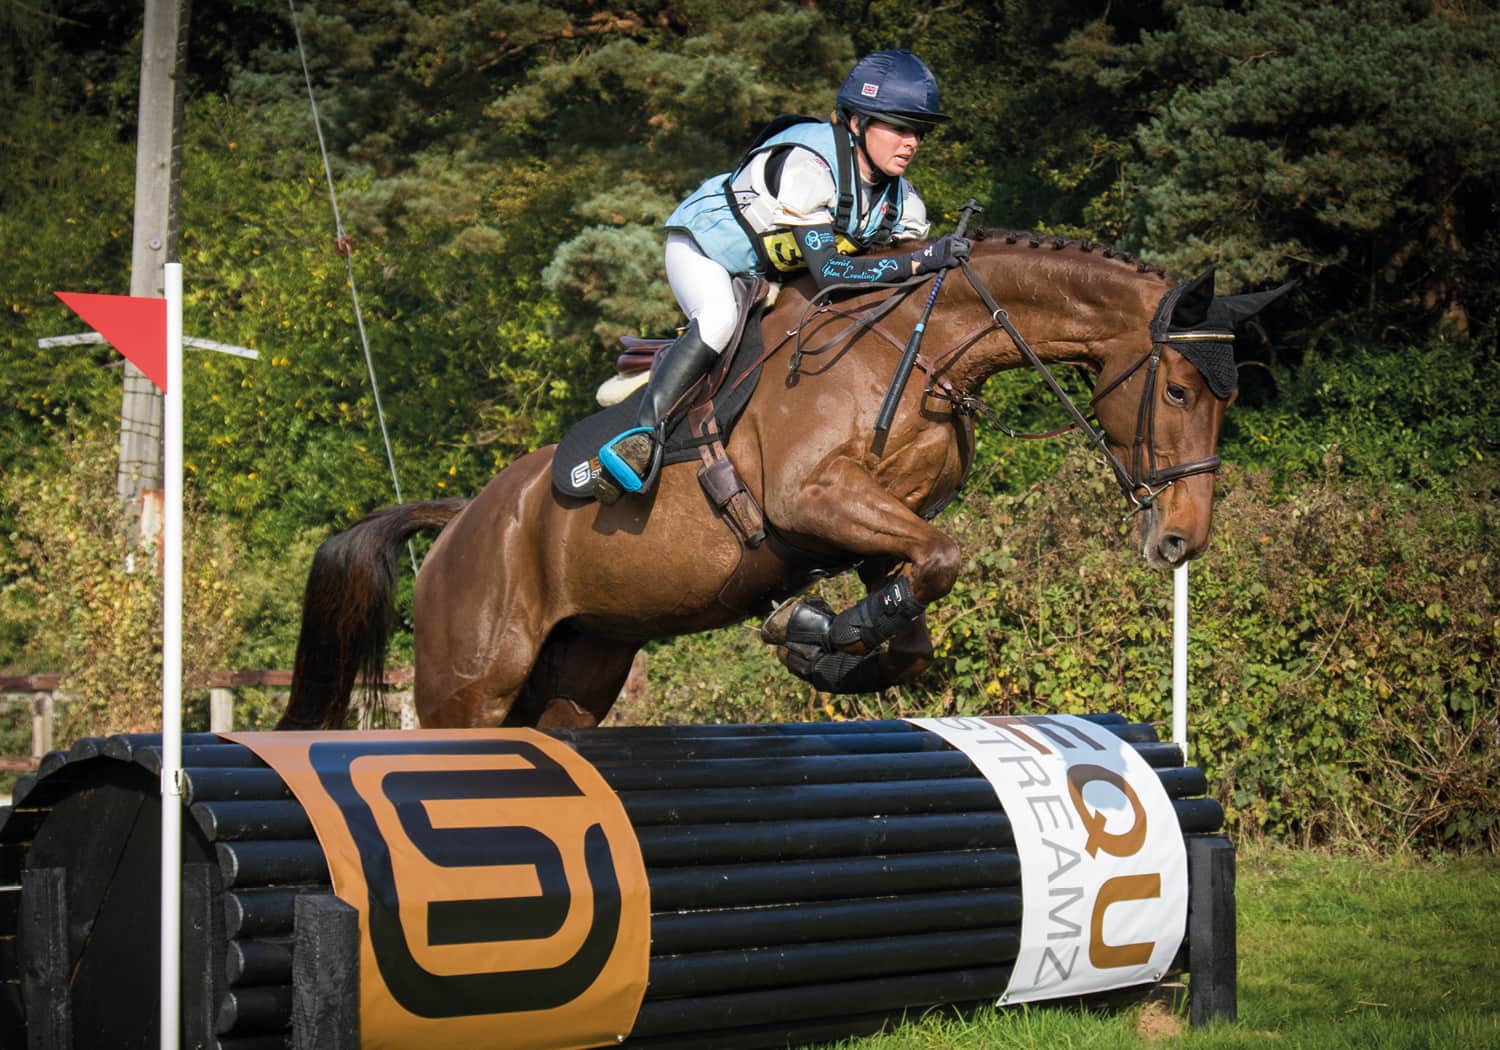 EQU Streamz magnetic horse bands joint care and wellbeing in horse and ponies. Pain relief and natural approach to support showjumping dressage eventing racing sports horses barrel racing roping rodeo and much more. harriet Upton 3 day eventing Queen.